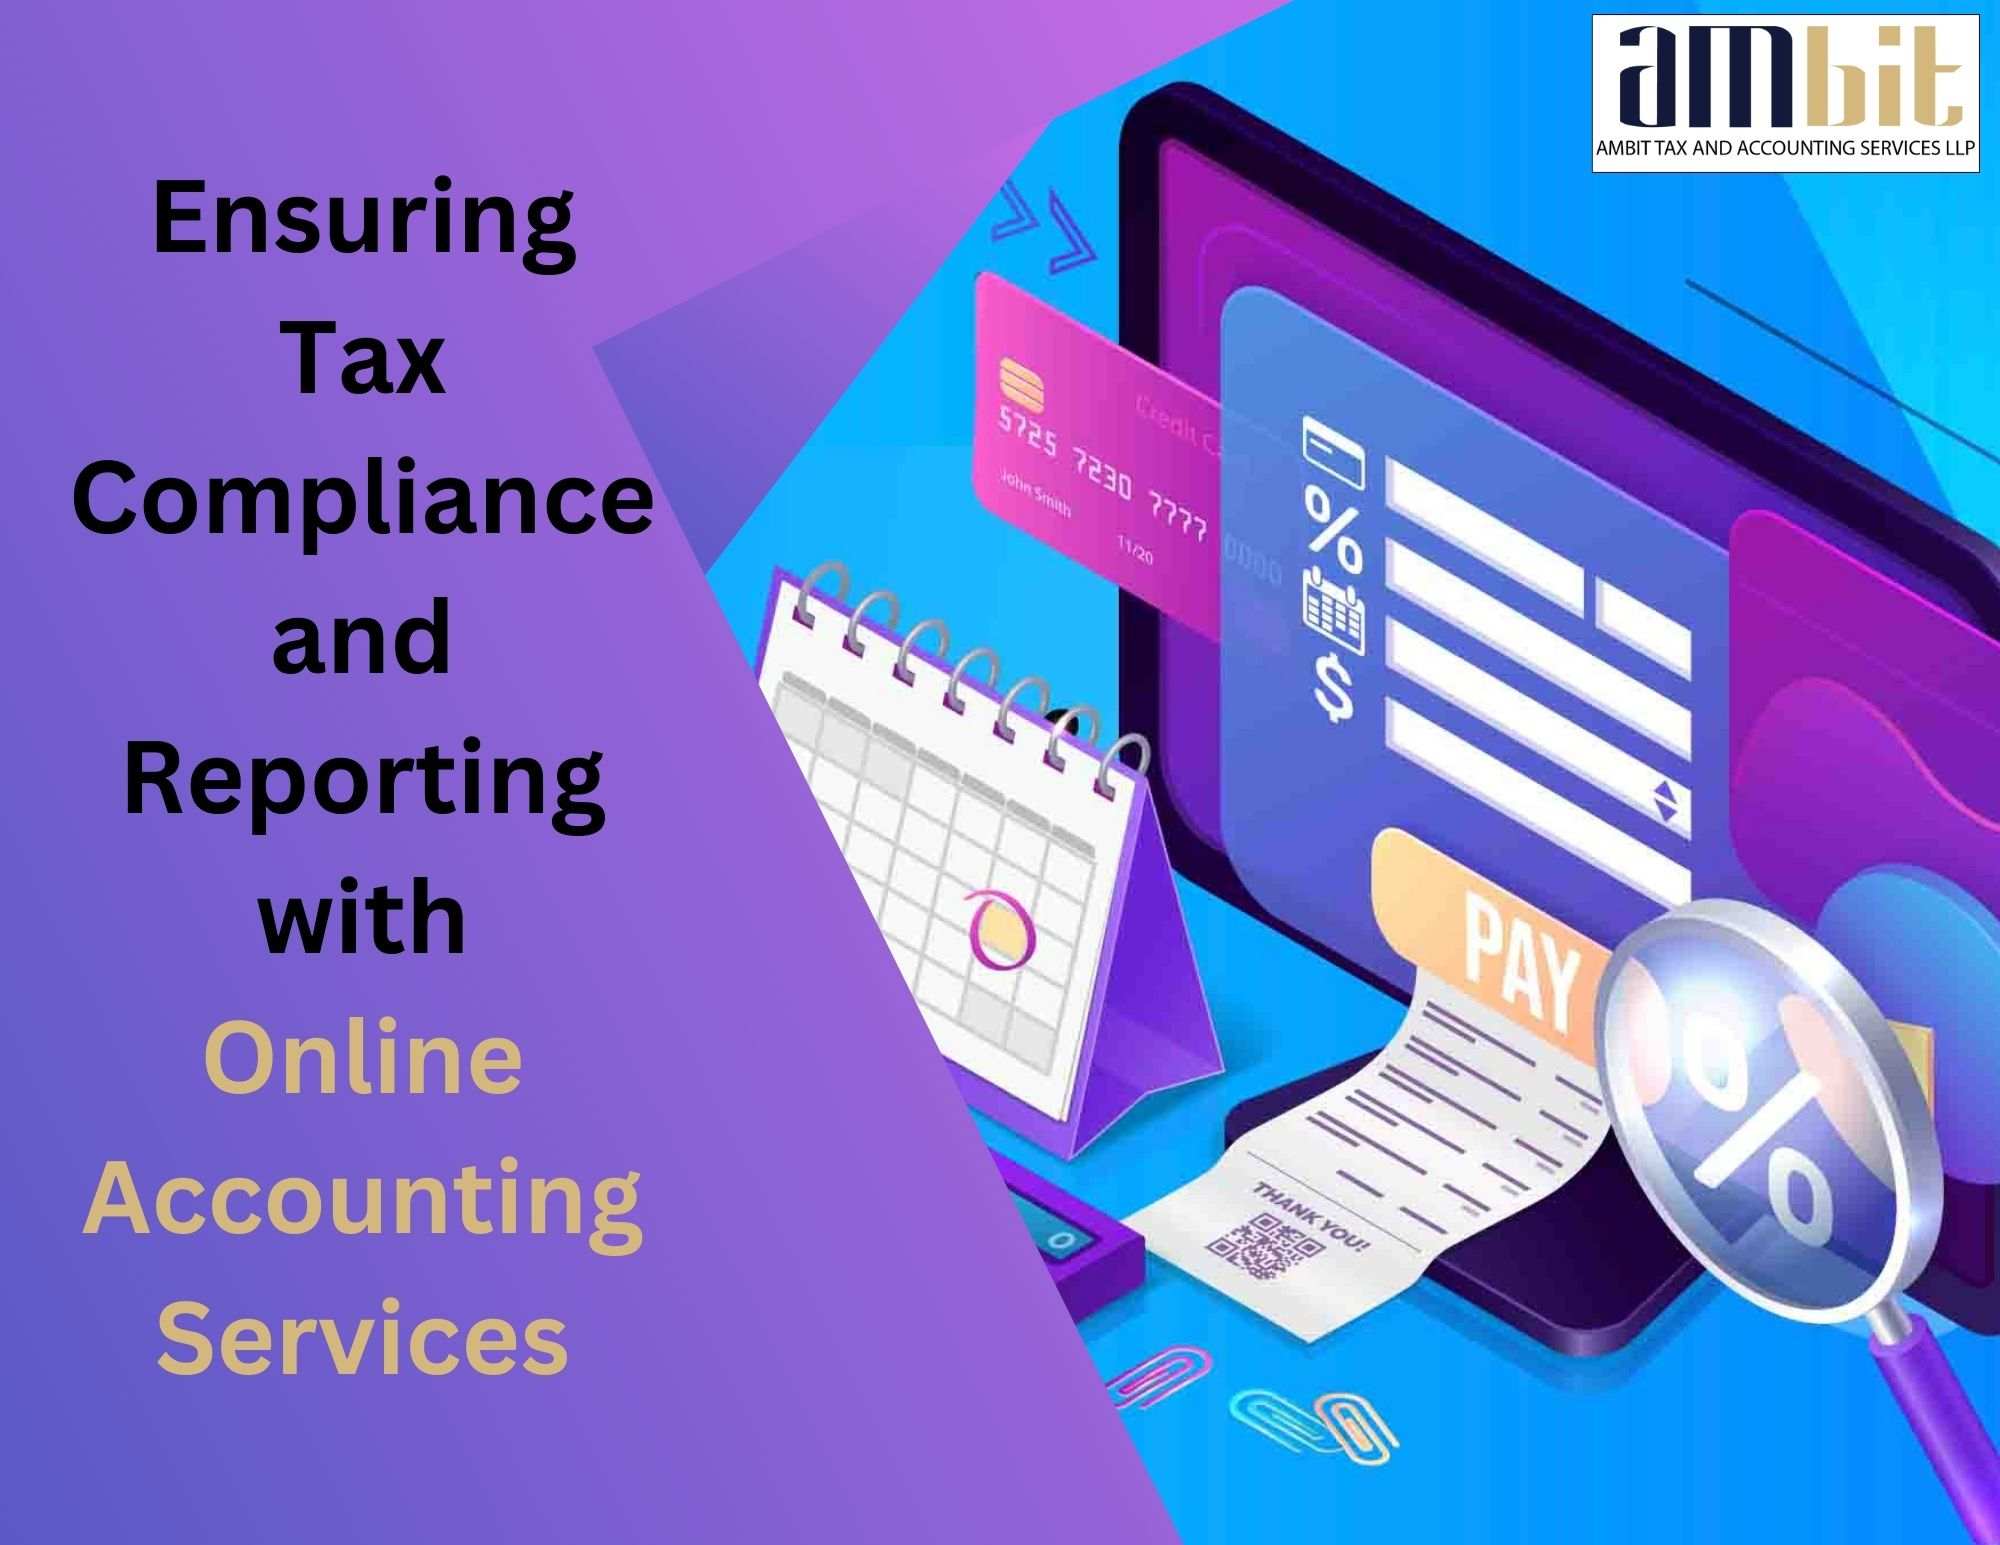  Ensuring Tax Compliance and Reporting with Online Accounting and Bookkeeping Services